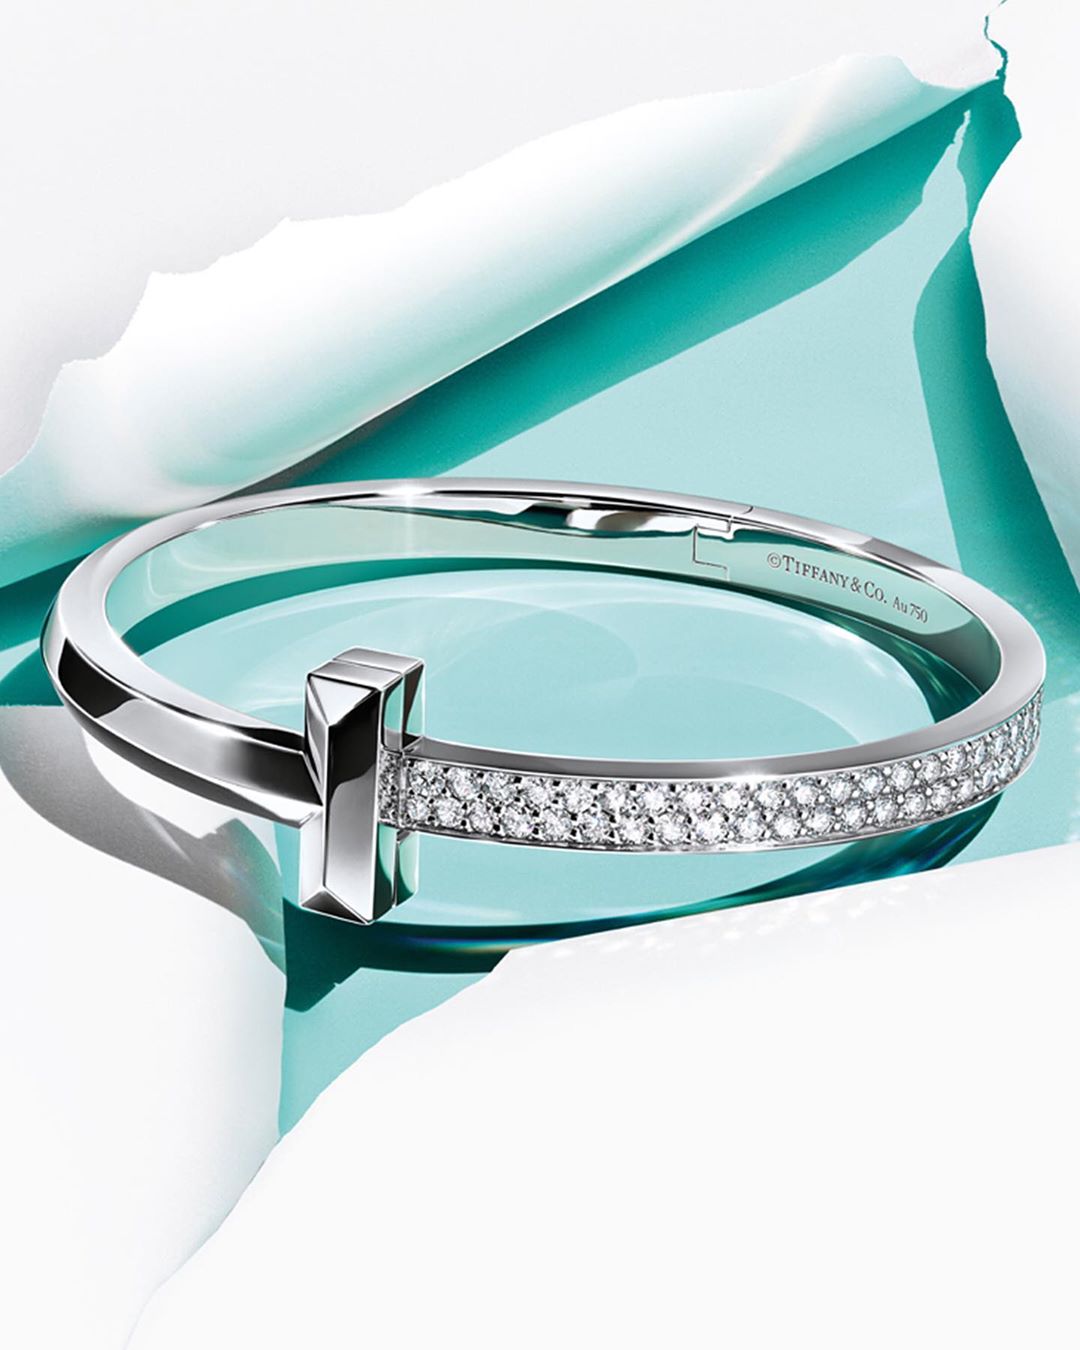 Tiffany & Co. - Tiffany T1—the ultimate icon. Now in 18k white gold, each diamond was set by hand in an intricate honeycomb pattern for added dimension and shine. Tap for extra ice and discover more v...